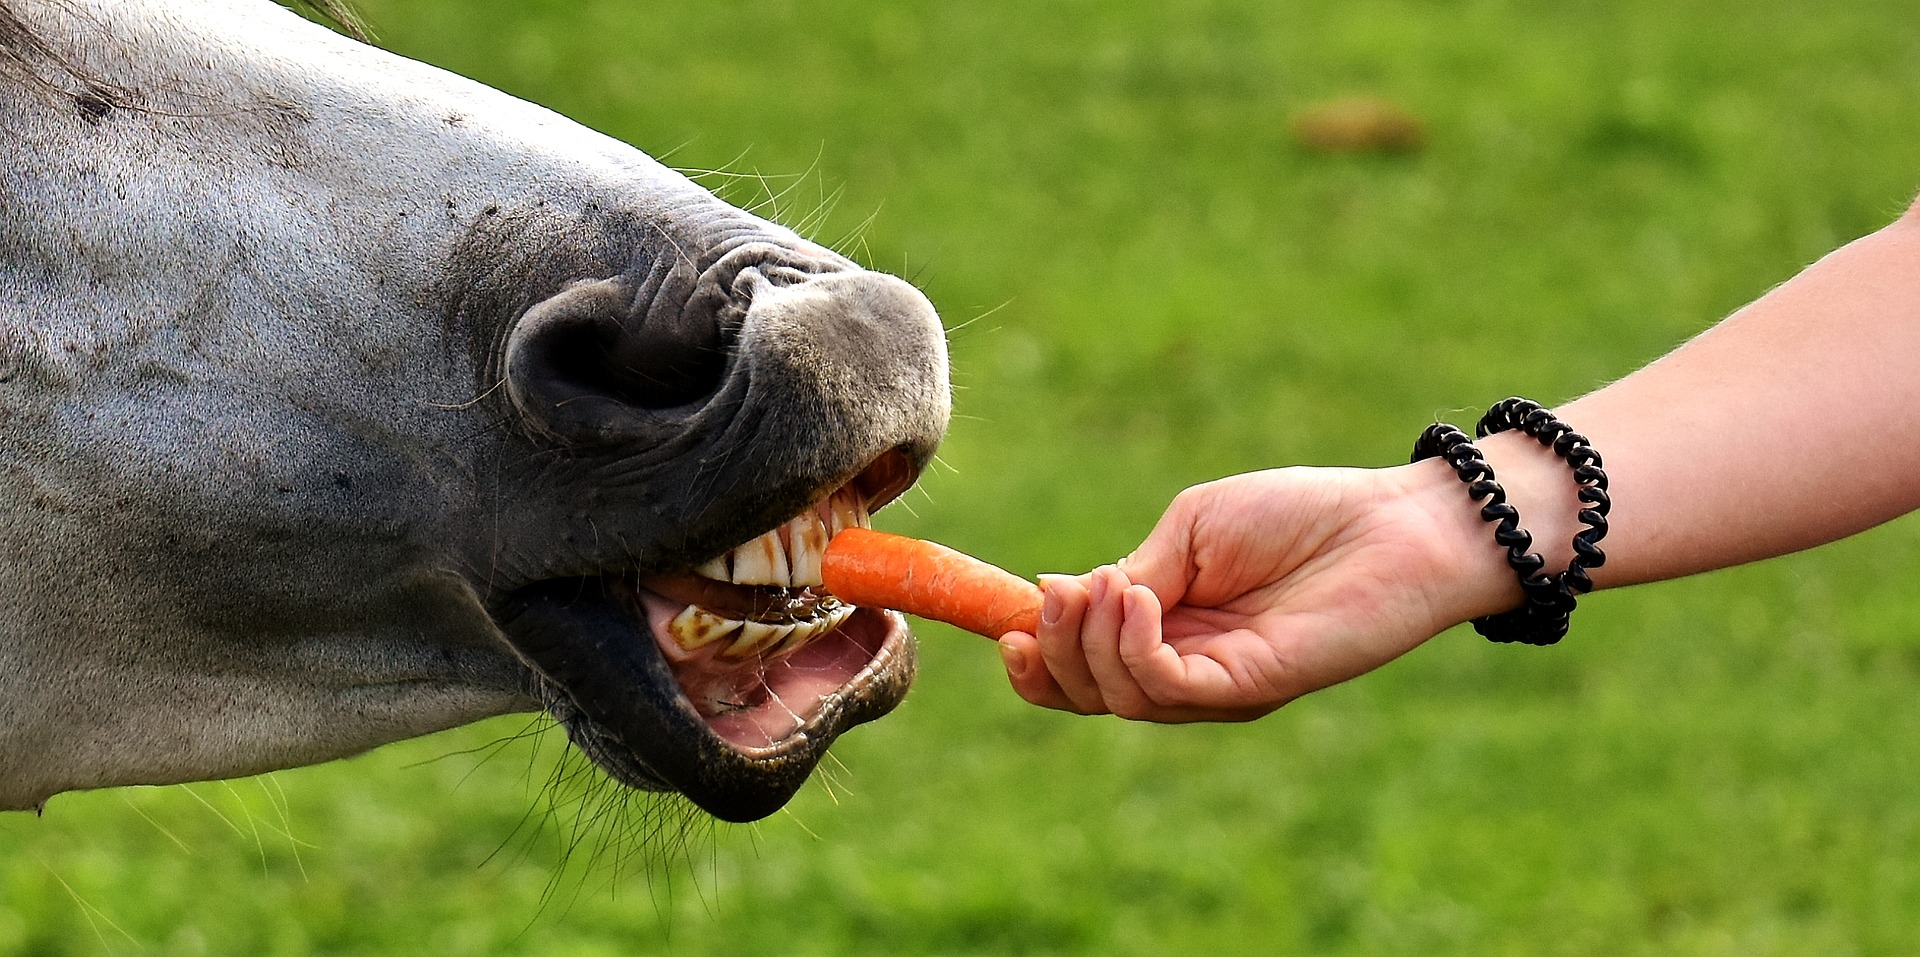 other fruit and veggies horses eat include carrots